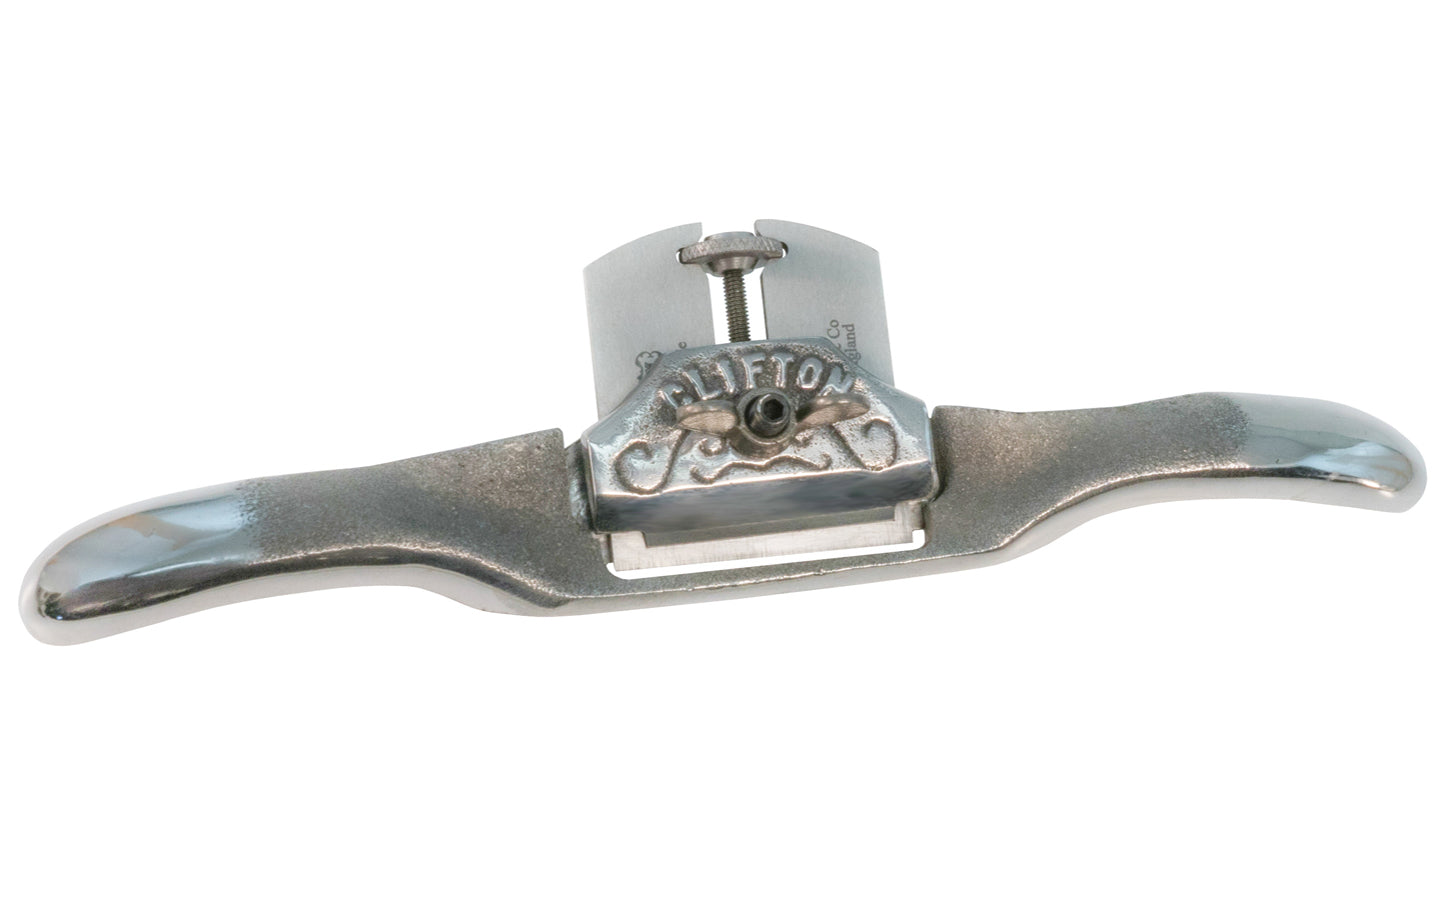 Clifton 600 Straight Spokeshave is made from very tough spheridal graphite/malleable iron. Cryogenically treated .01 tool steel HRC 59-61. Fully adjustable blade for depth of cut, resting at 25° angle. 2-1/8